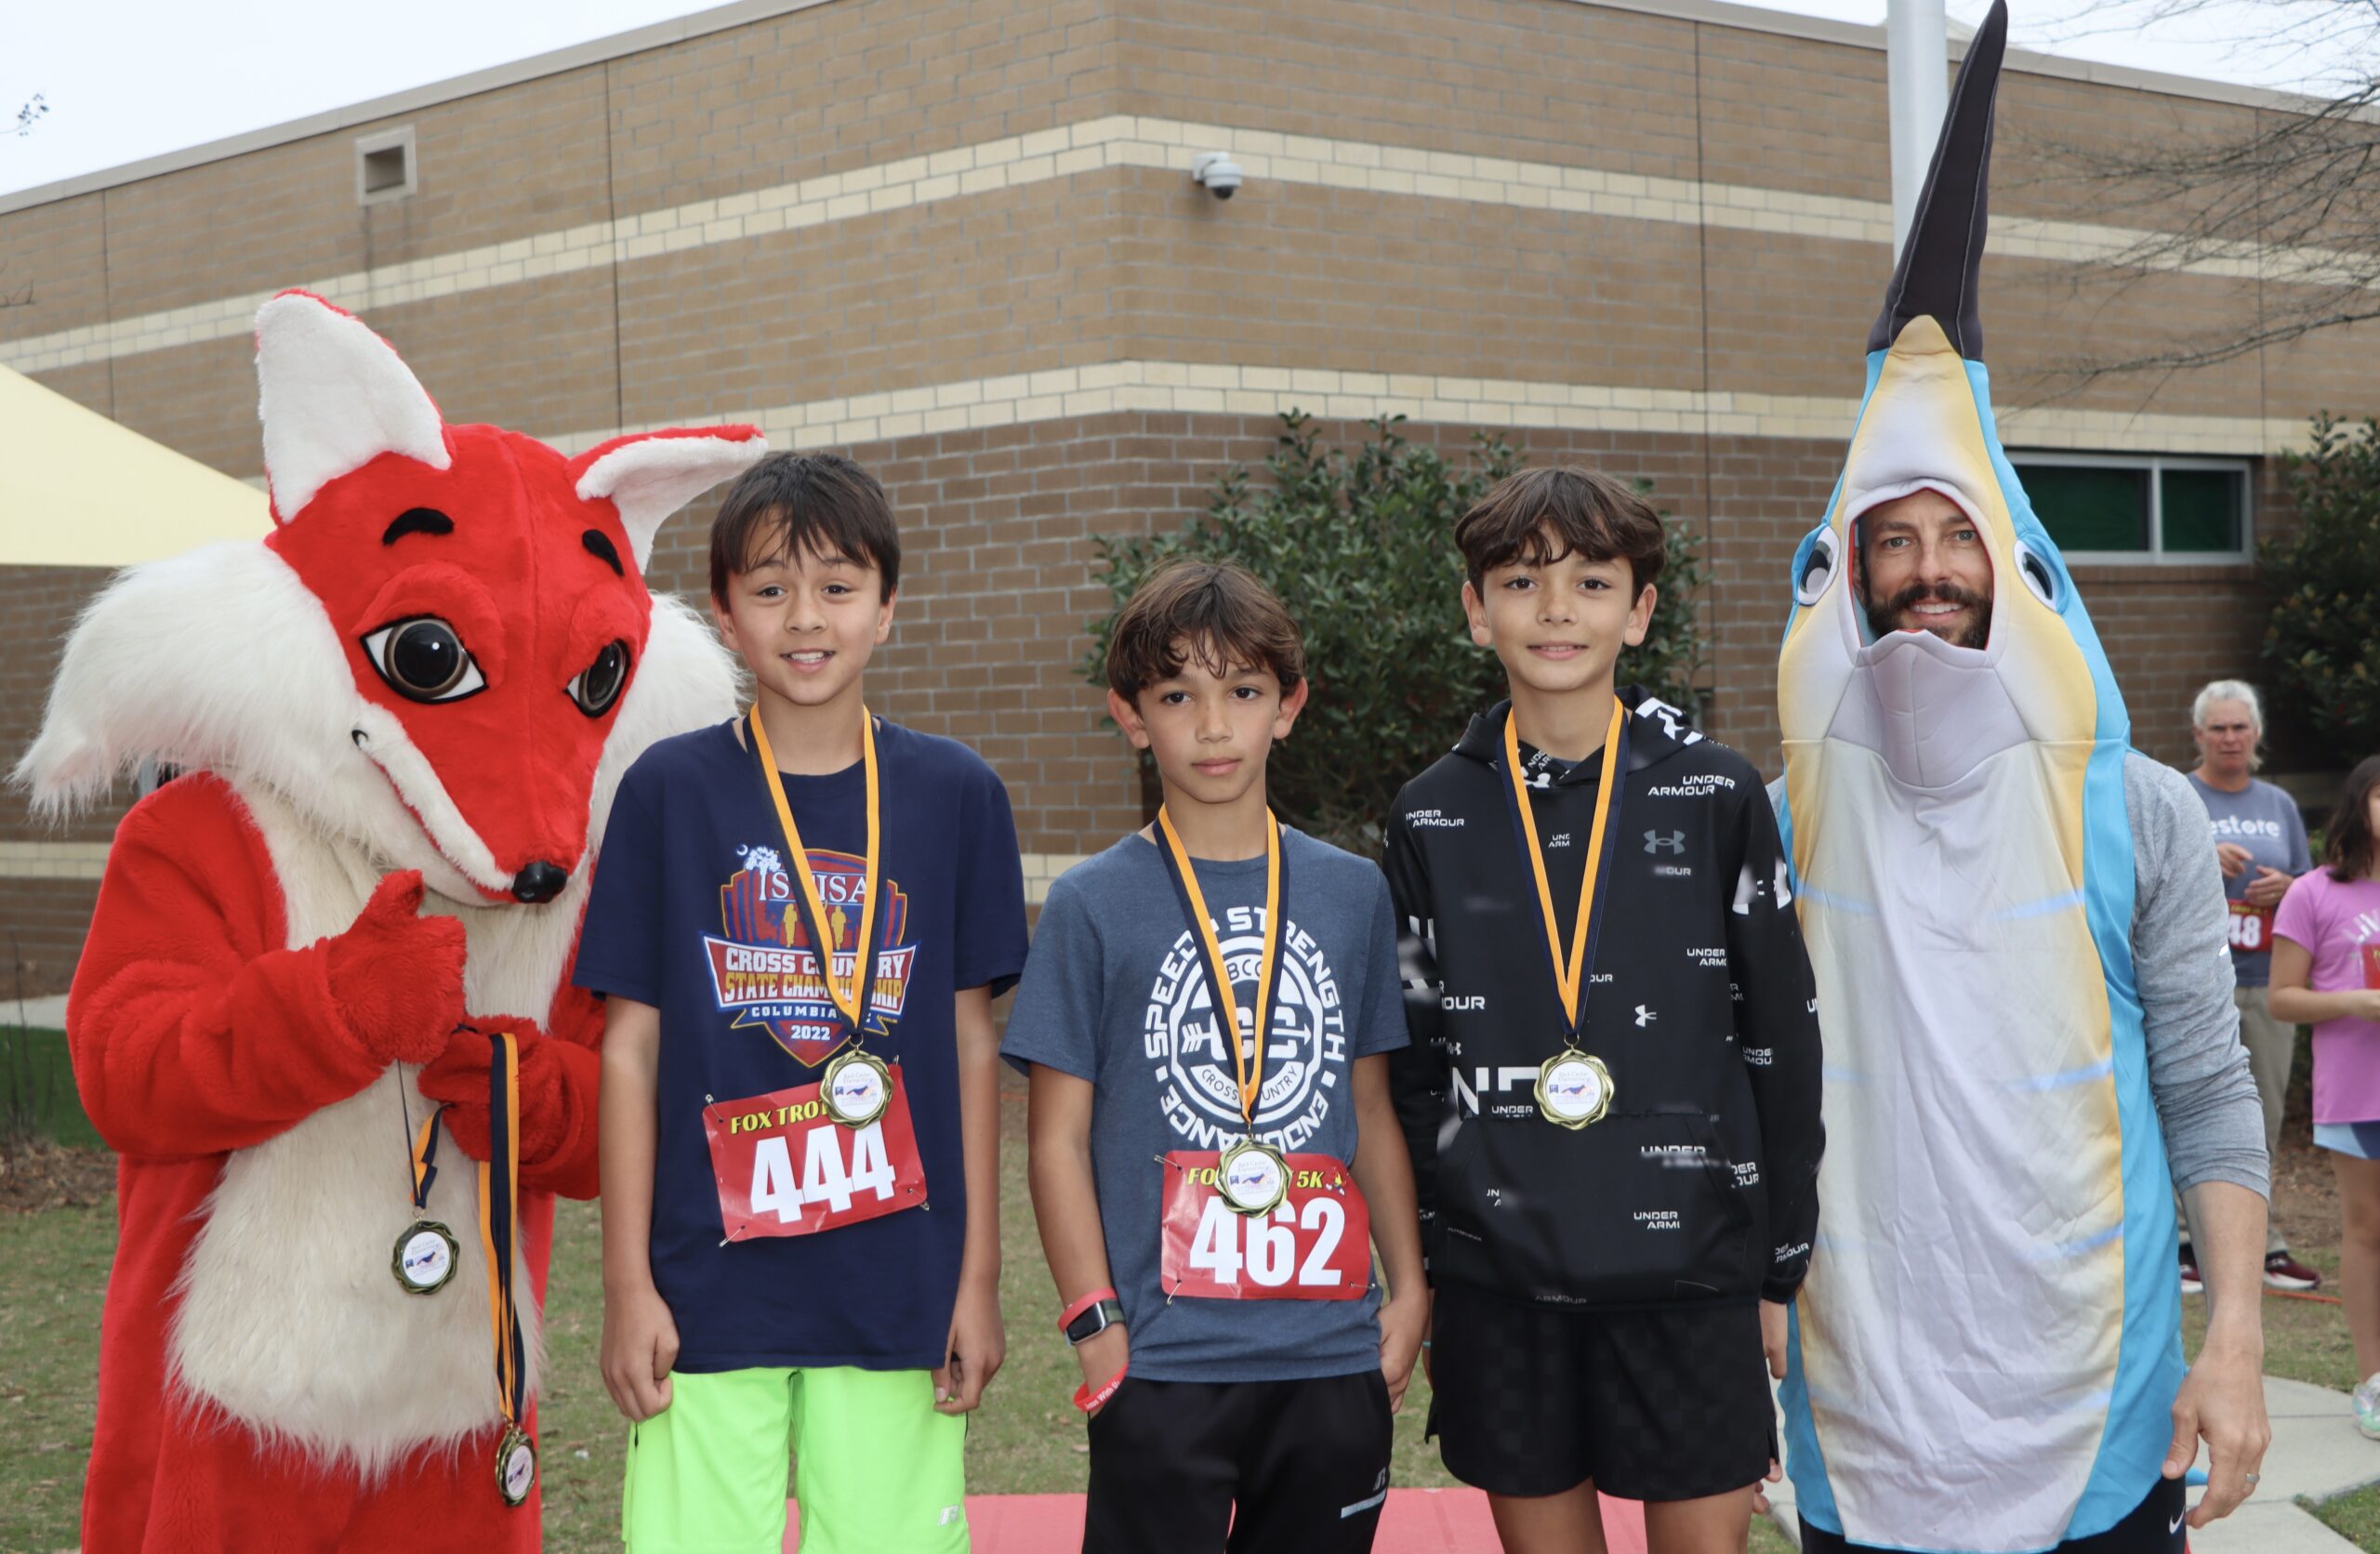 Charles Russo, Foxy, and Winners from 5K.